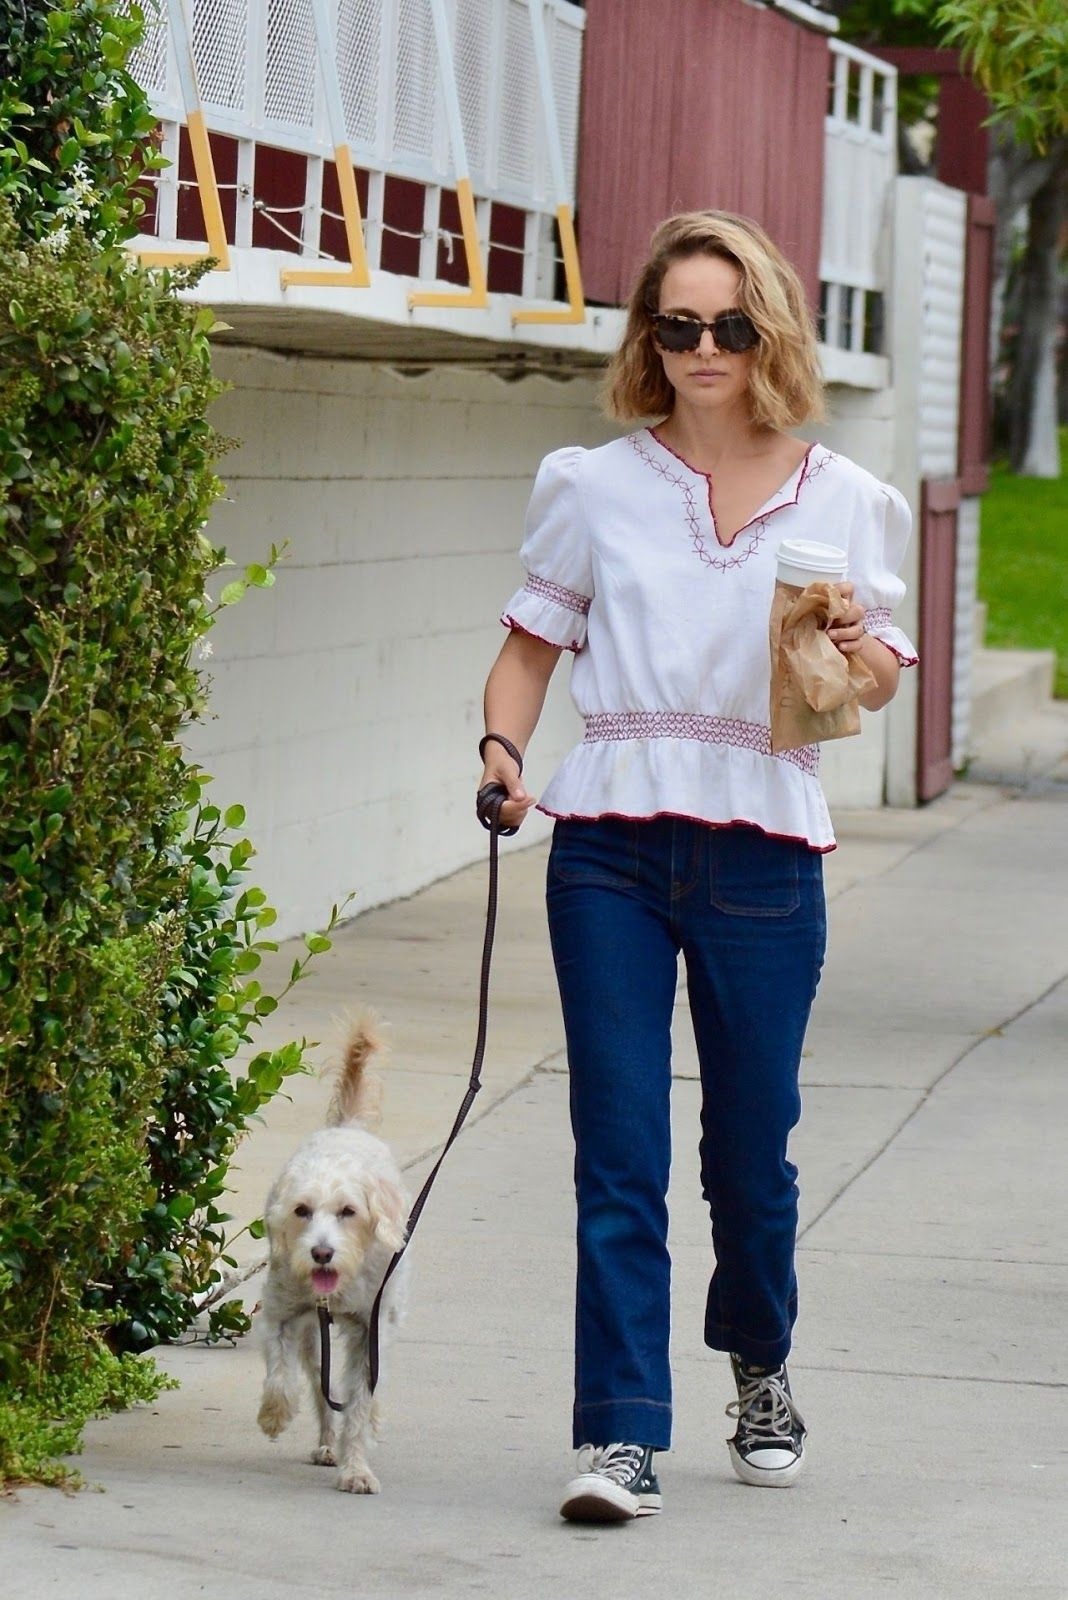 Strolling With her Pooch